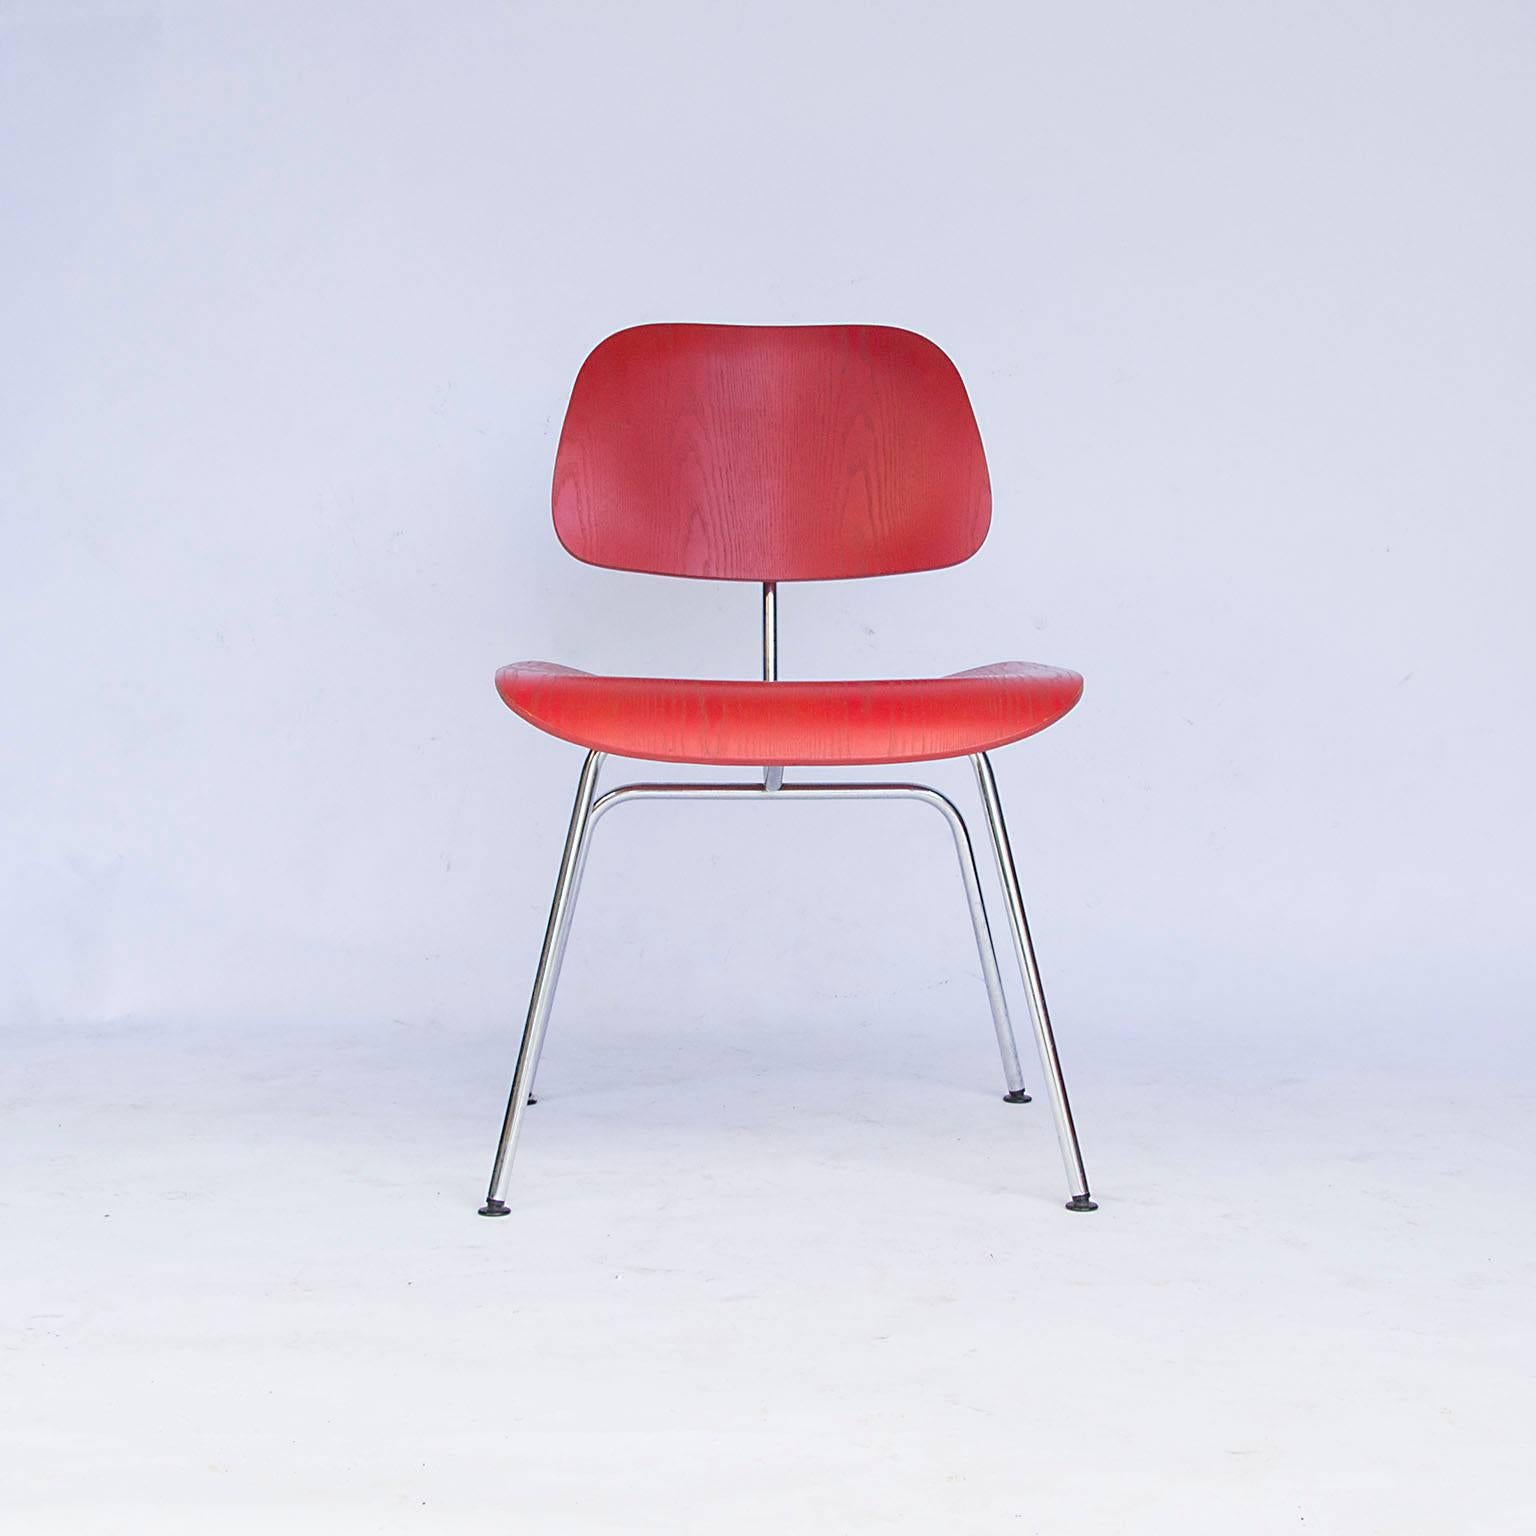 German 1946, Charles Eames, DCM in Ash, Original by Vitra Painted in Red